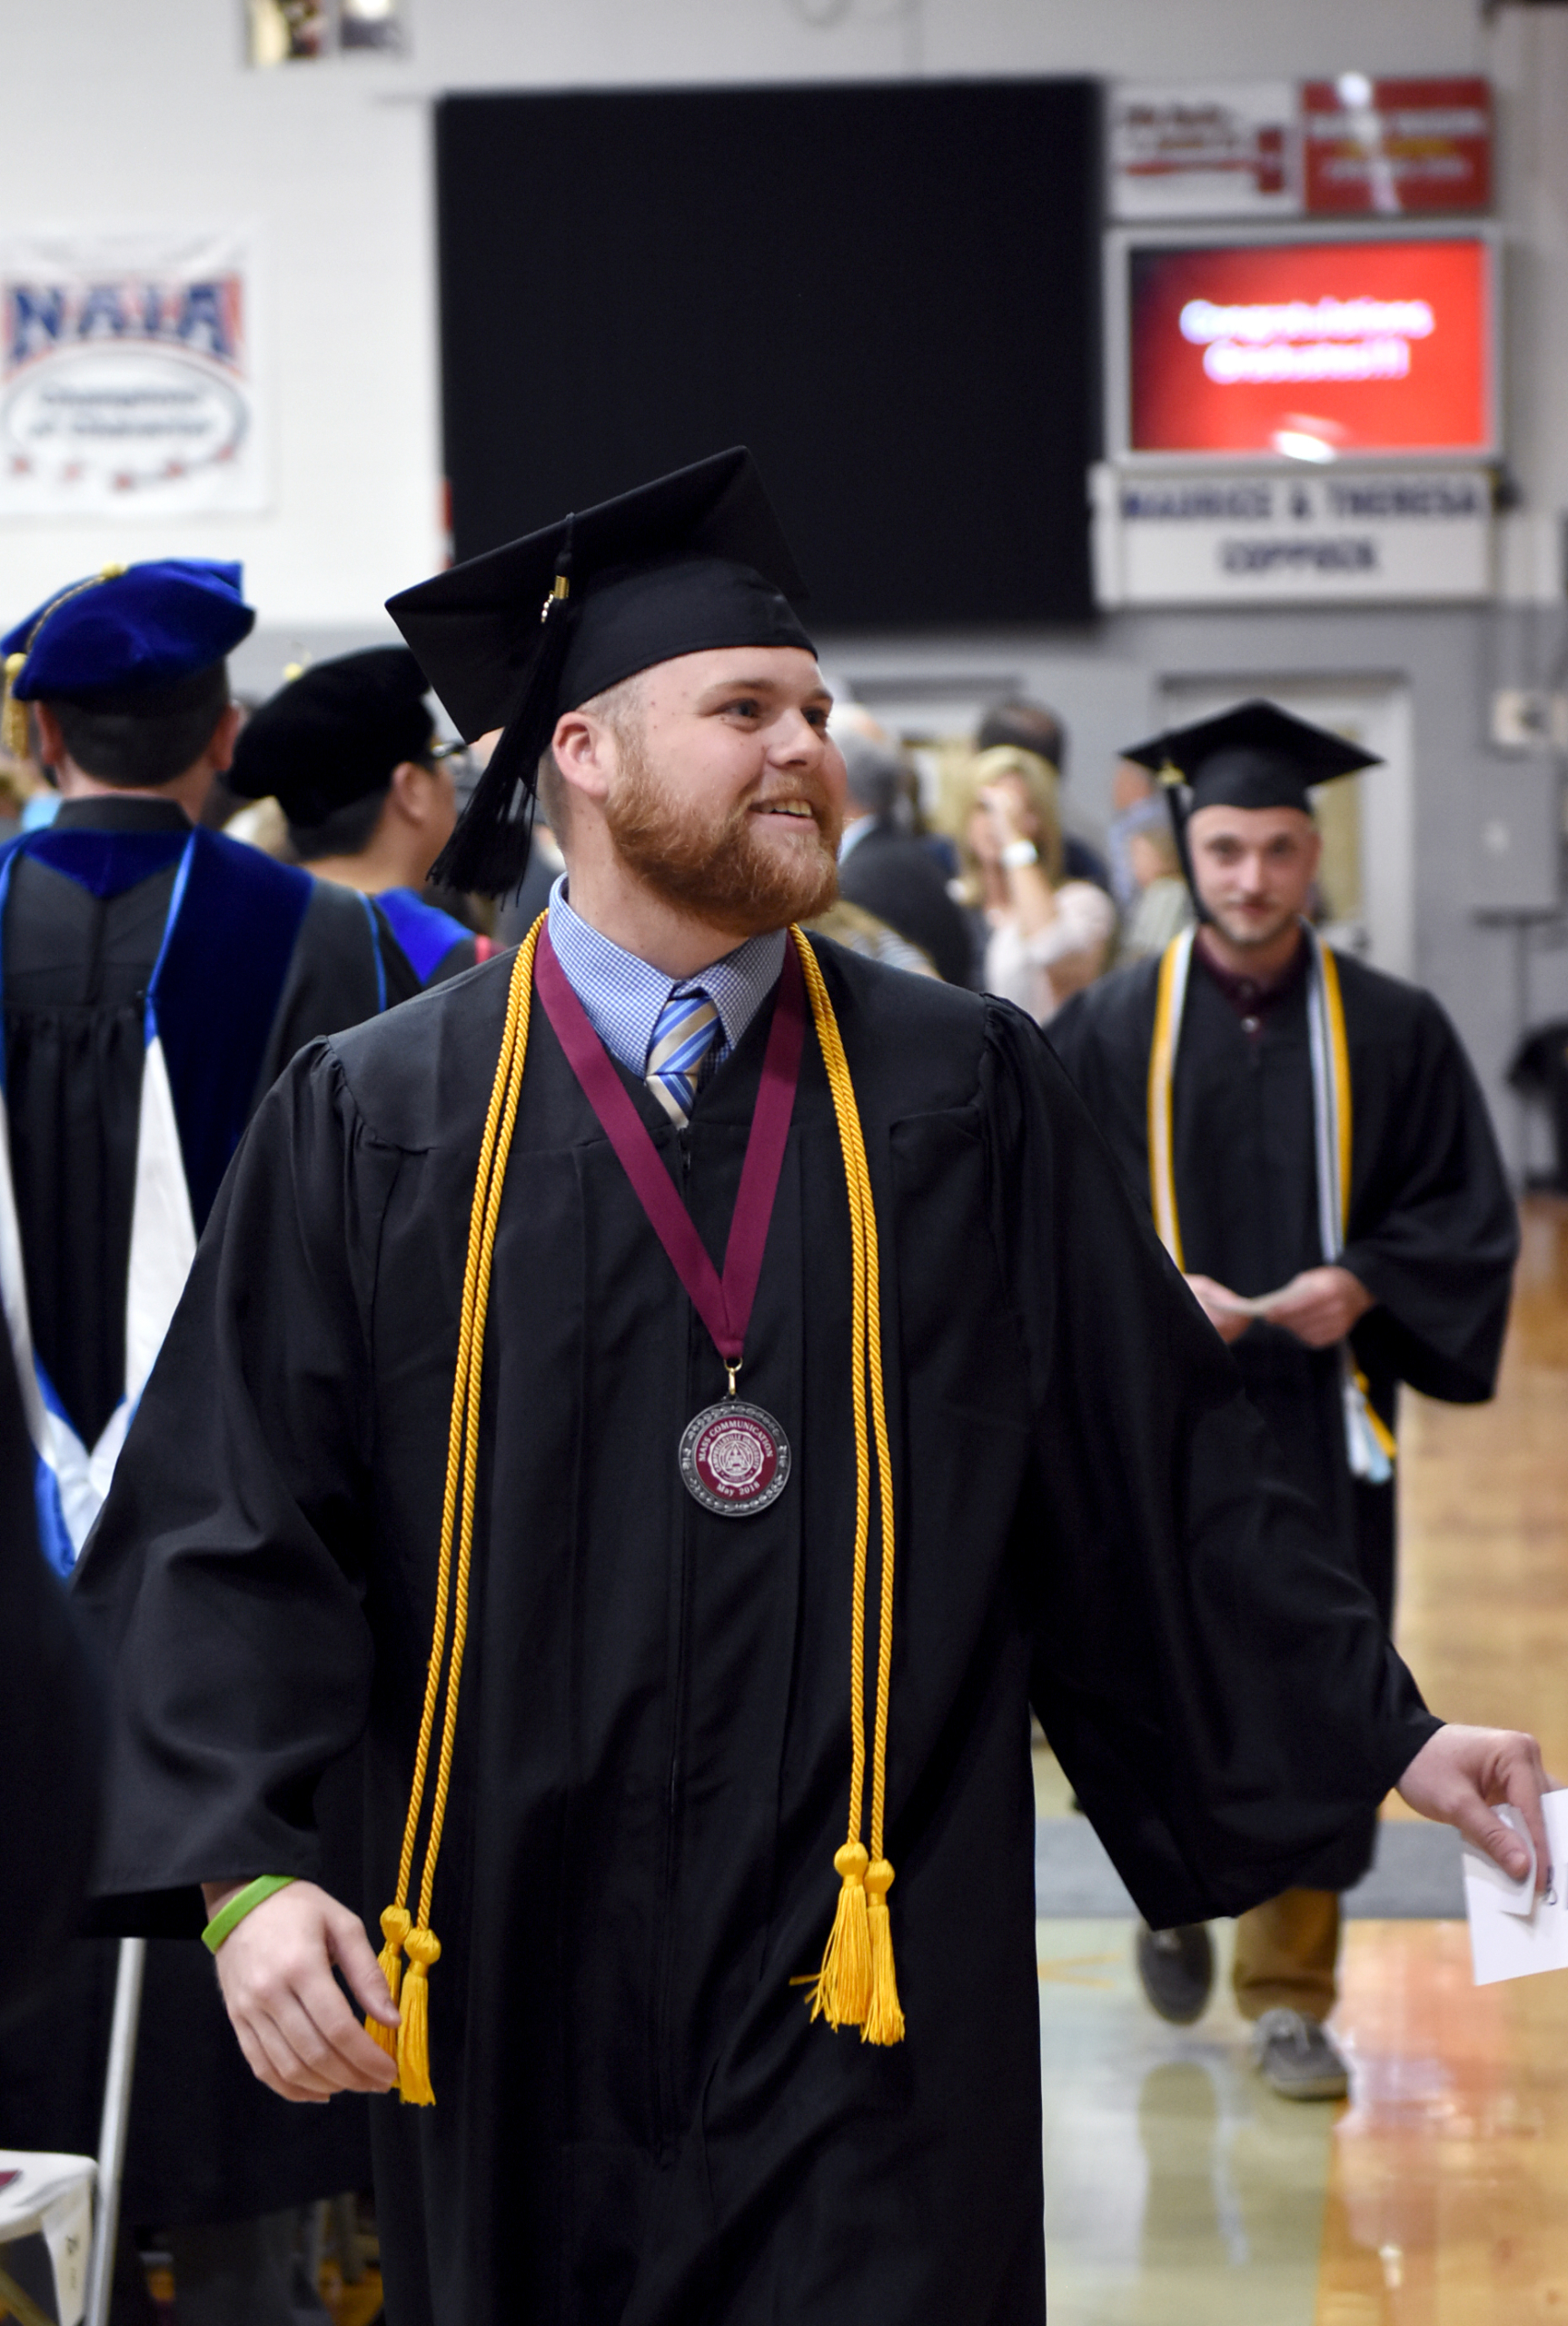 Alex Meade -- Alexander Meade acknowledges family and friends as he enters the Powell Gymnasium for the 2018 commencement ceremony. (CU Photo by Ariel C. Emberton)